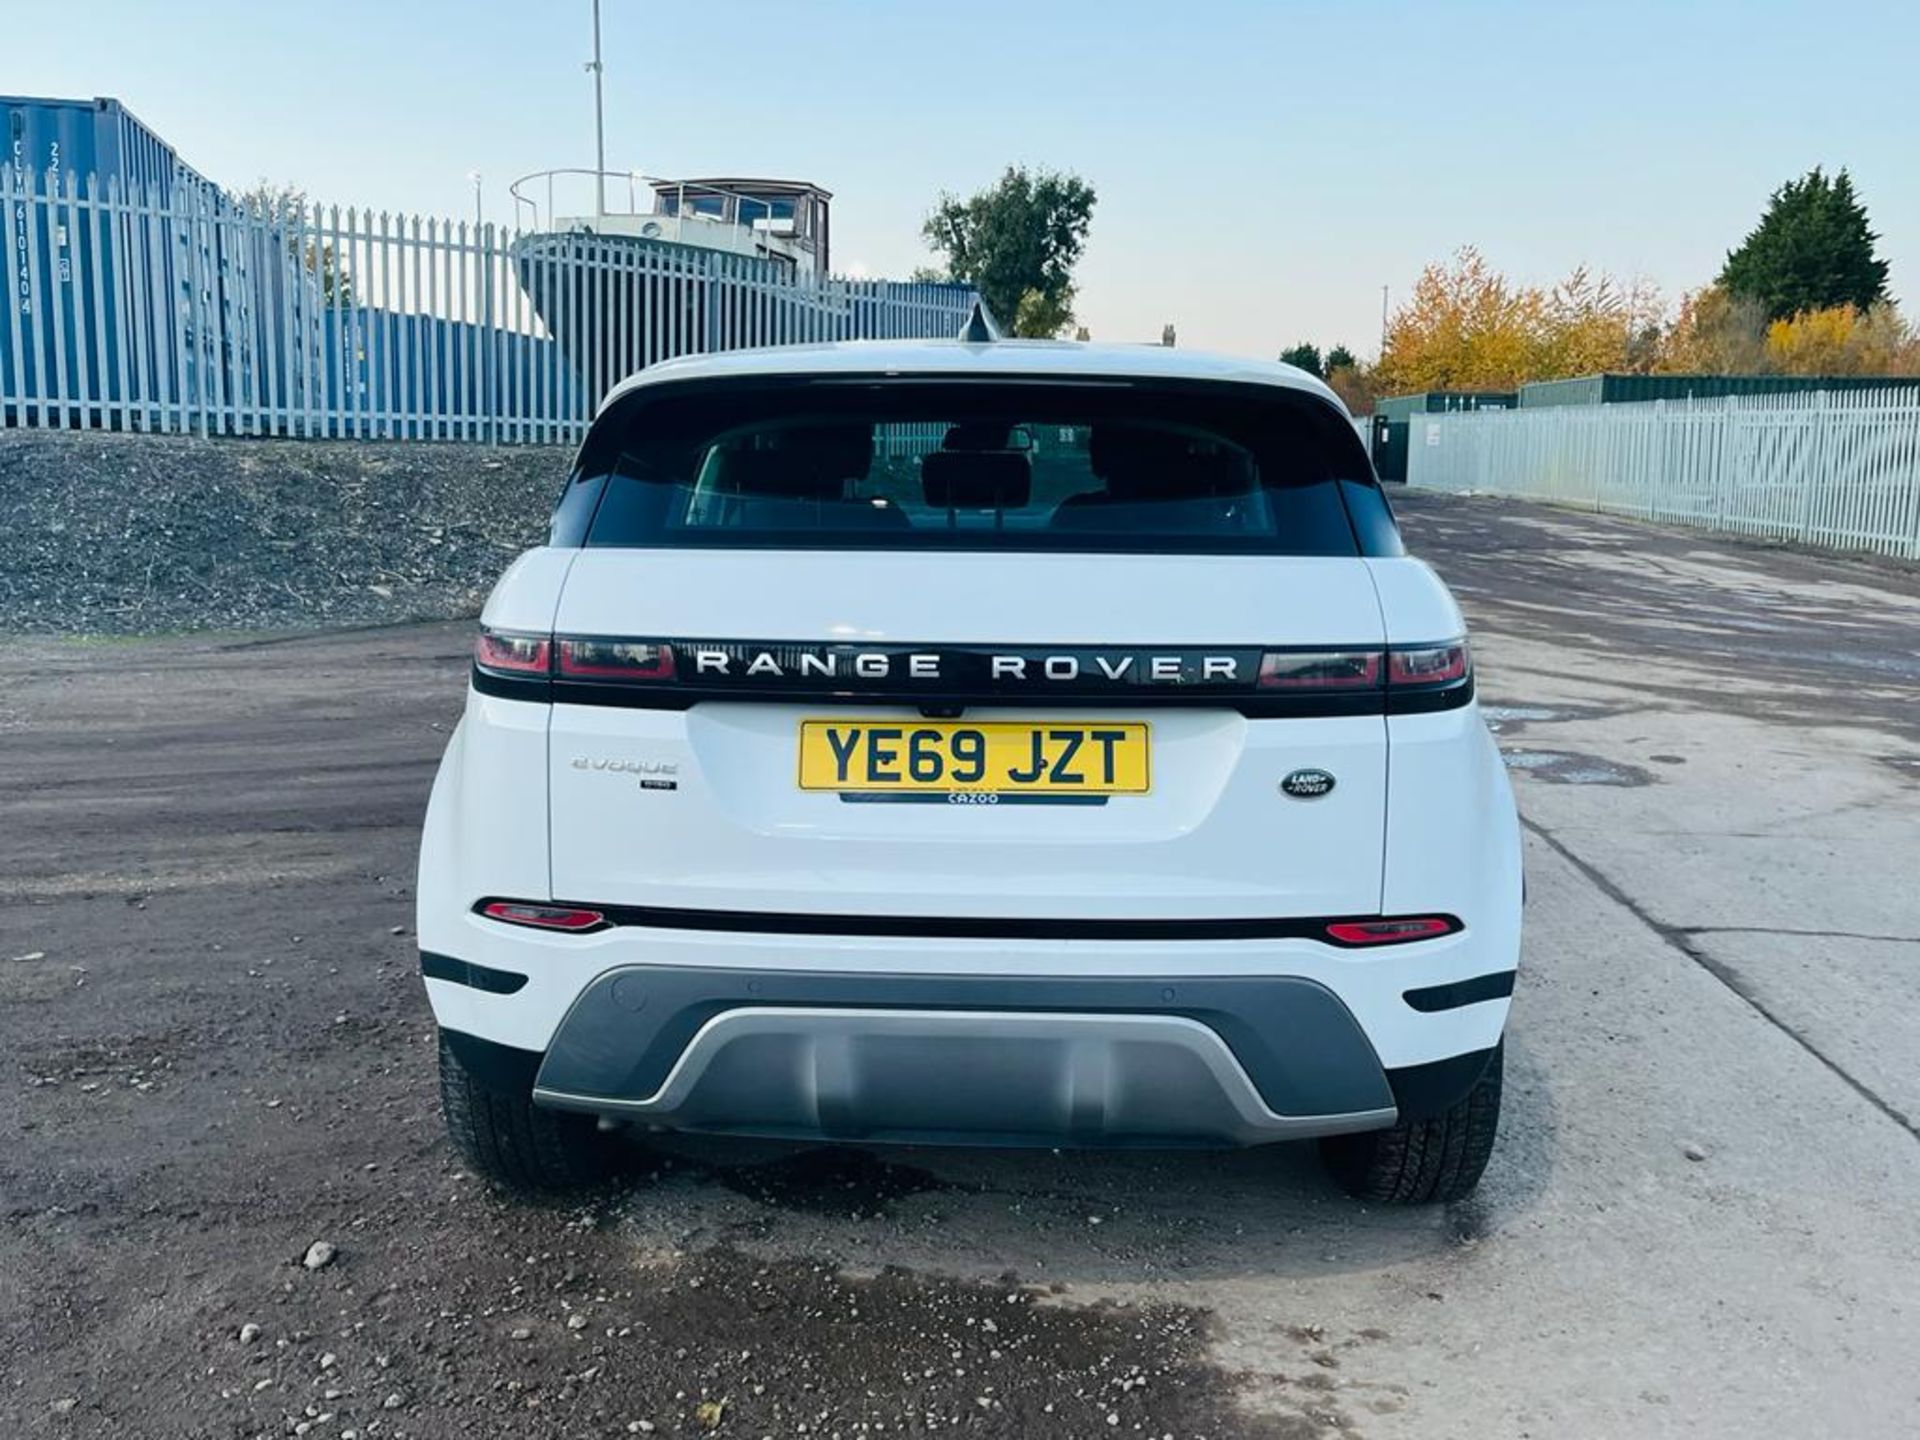 ** ON SALE ** Land Rover Range Rover Evoque 2.0 D150 2019 '69 Reg' A/C - Only 43,987 Miles - Image 6 of 32